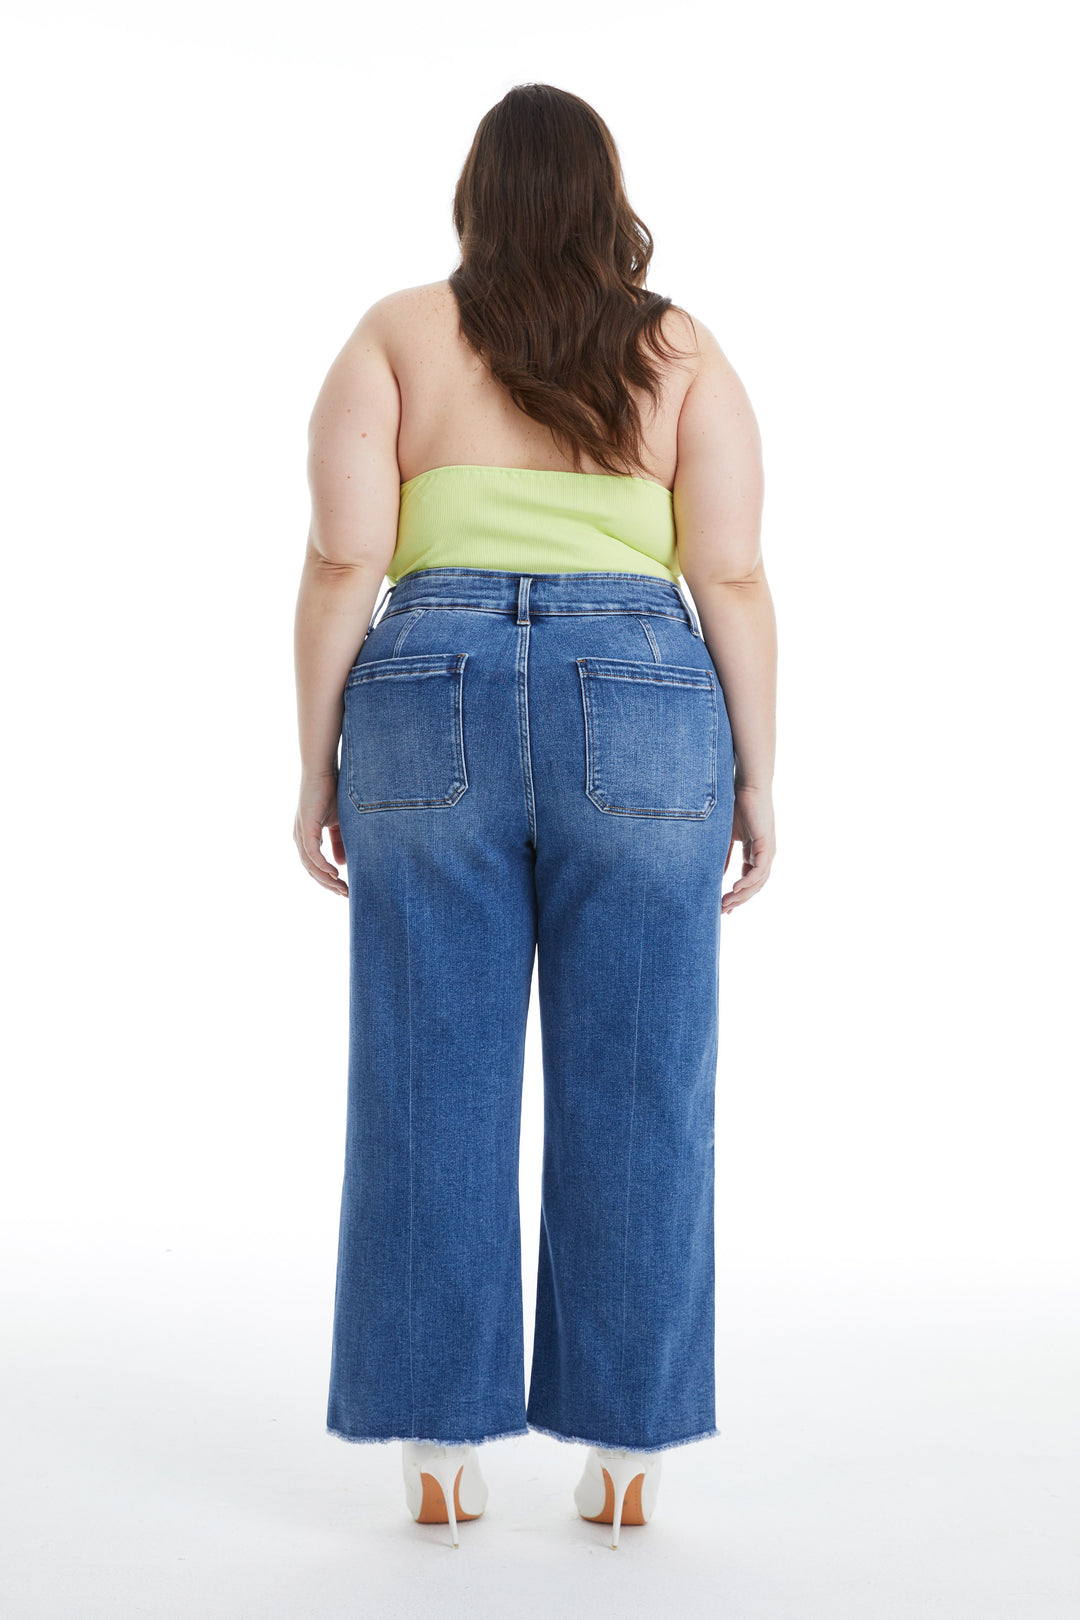 PLUS SIZE HIGH RISE WIDE LEG JEANS WITH RAW HEM